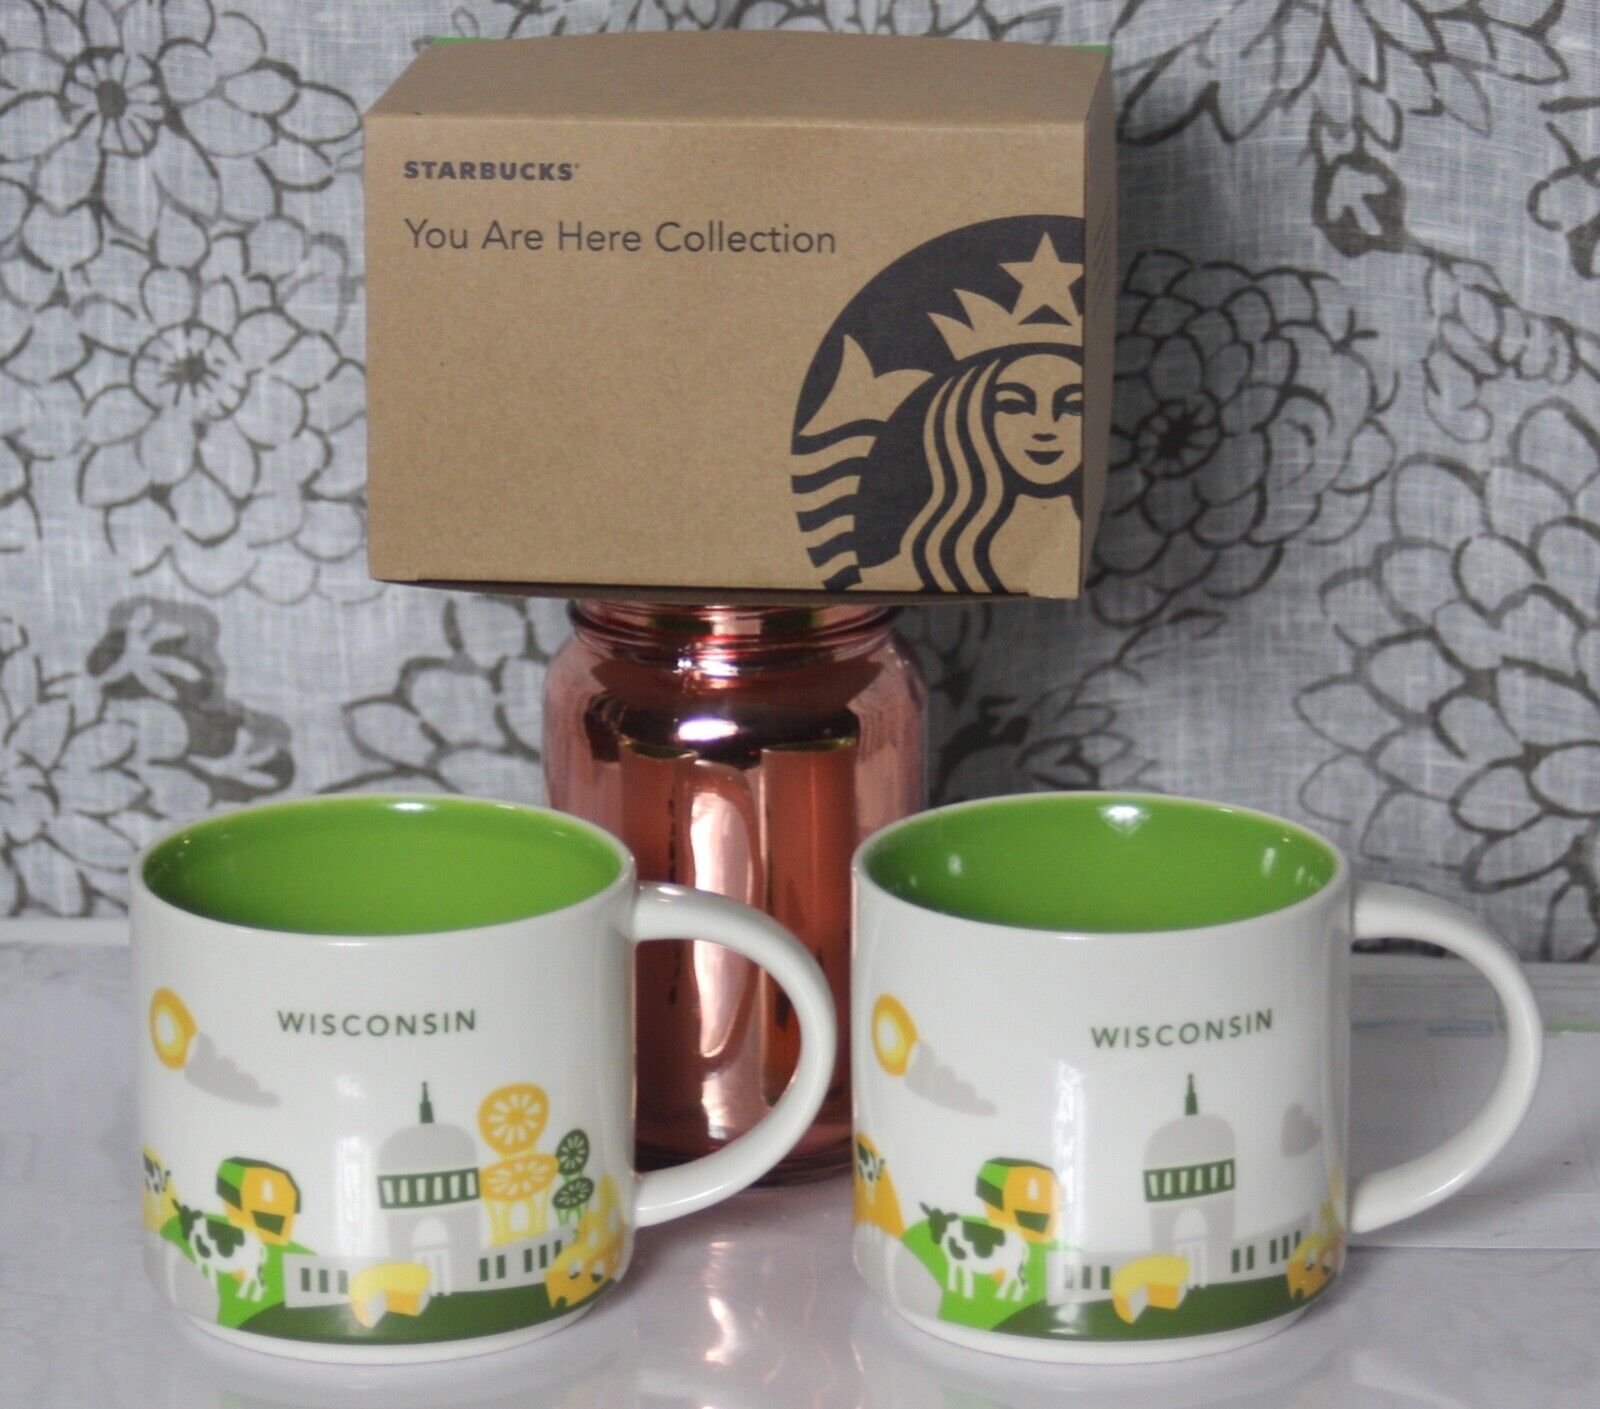 Set Starbucks Wisconsin 1, 2  Chairs You Are Here YAH Mug Cup WI Chair 11035620